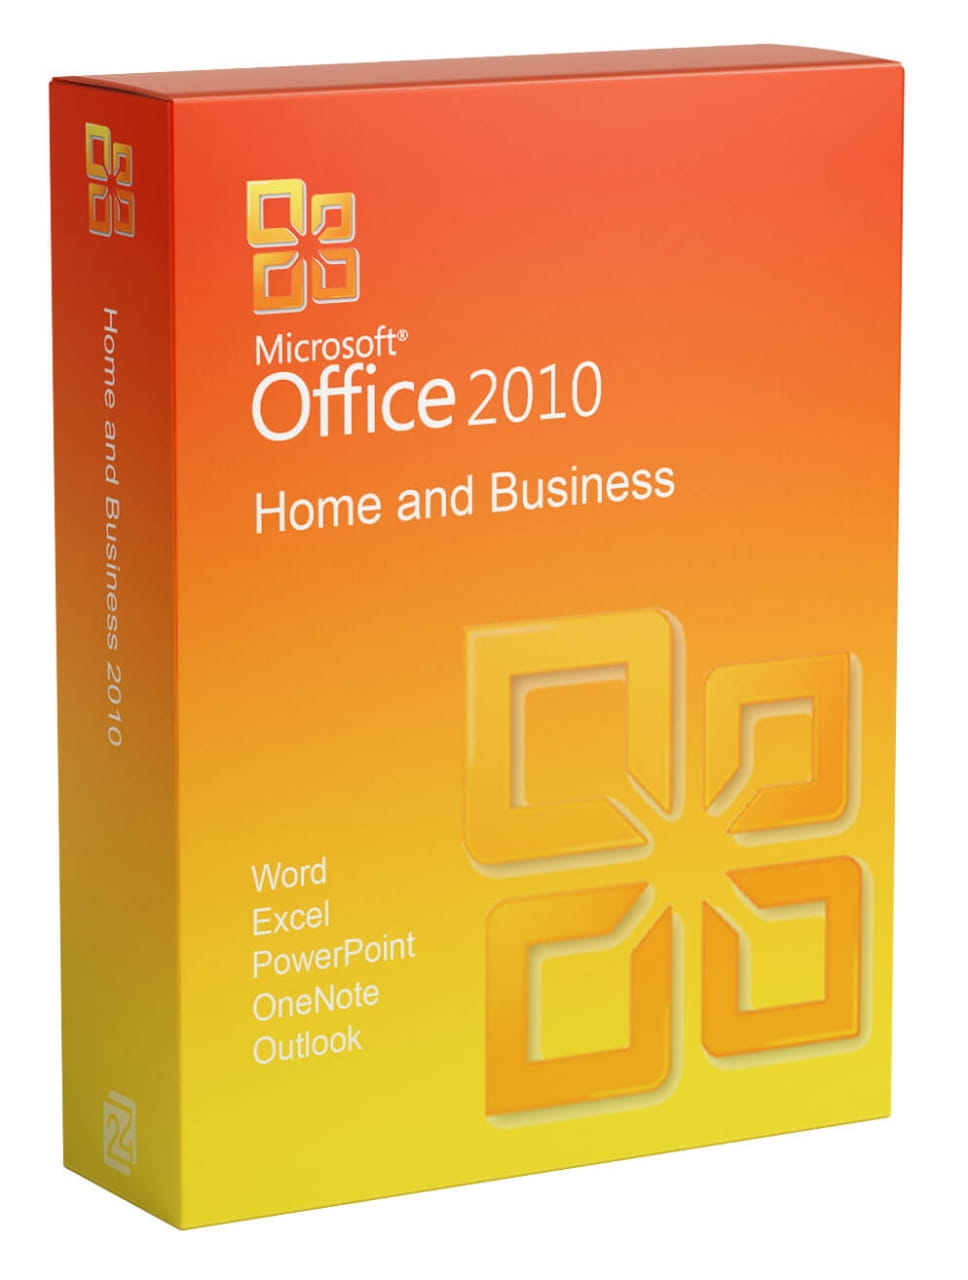 microsoft co microsoft office 2010 home and business red